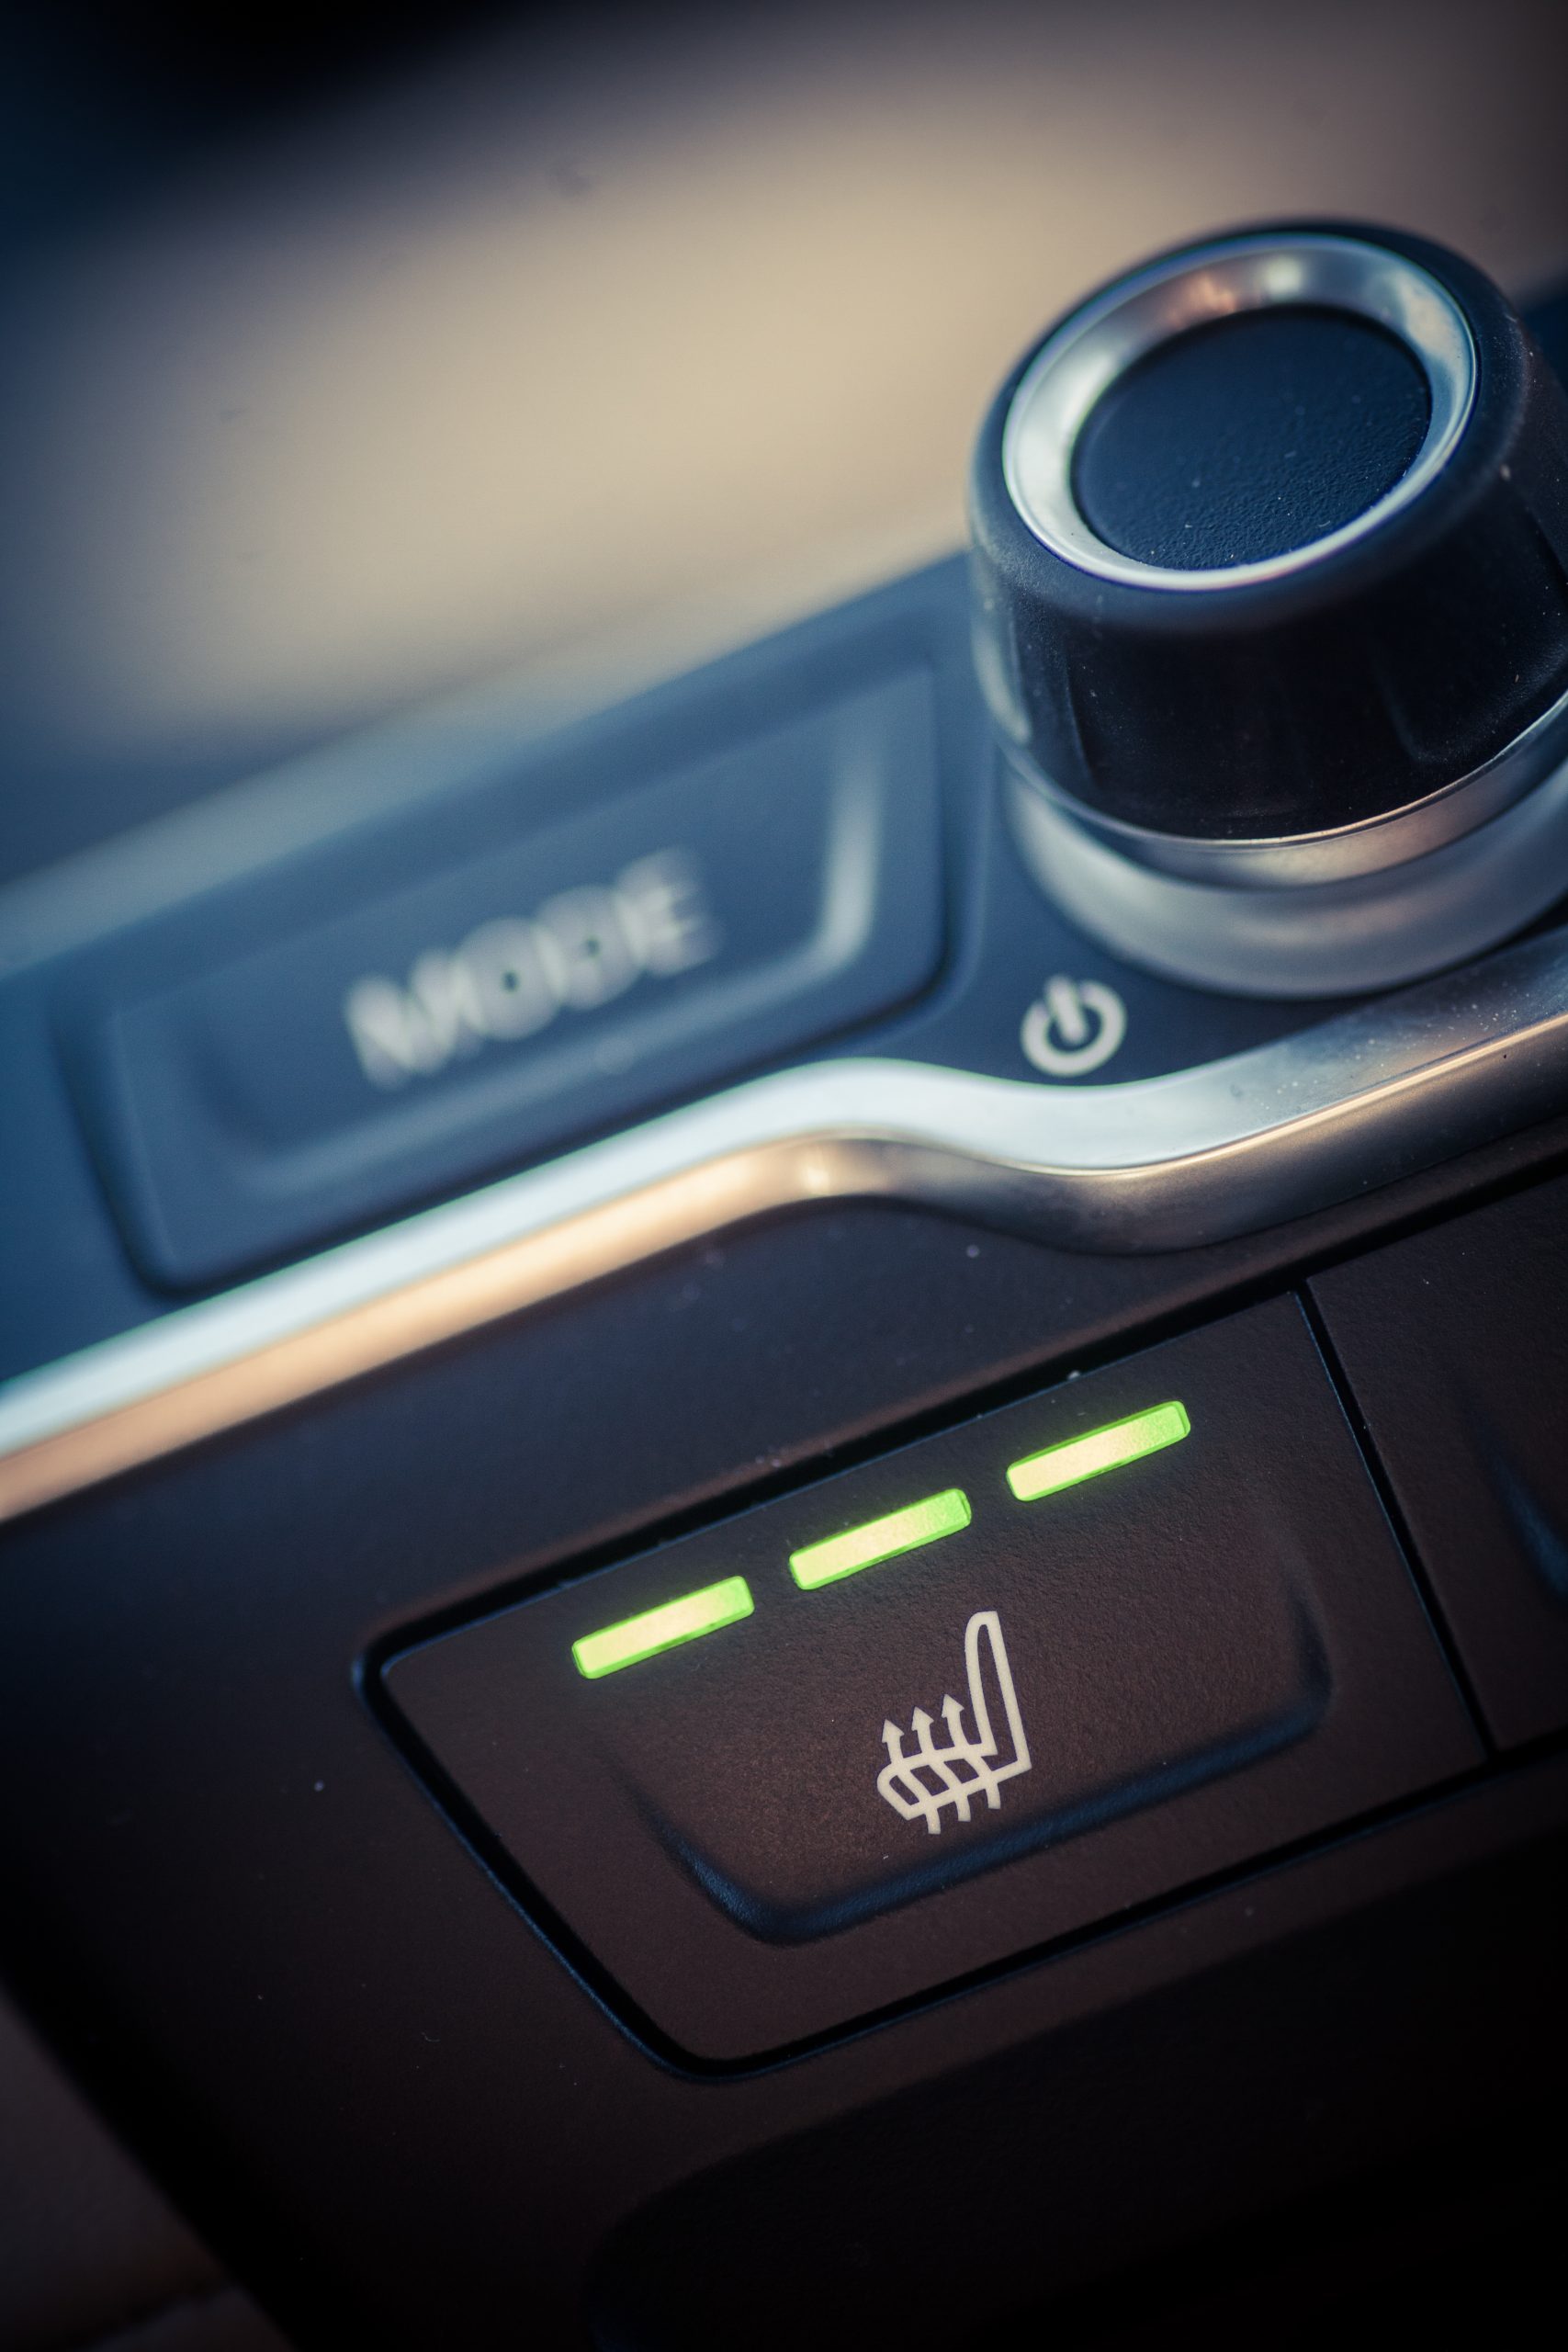 Close up shot of a car's heated seats button.